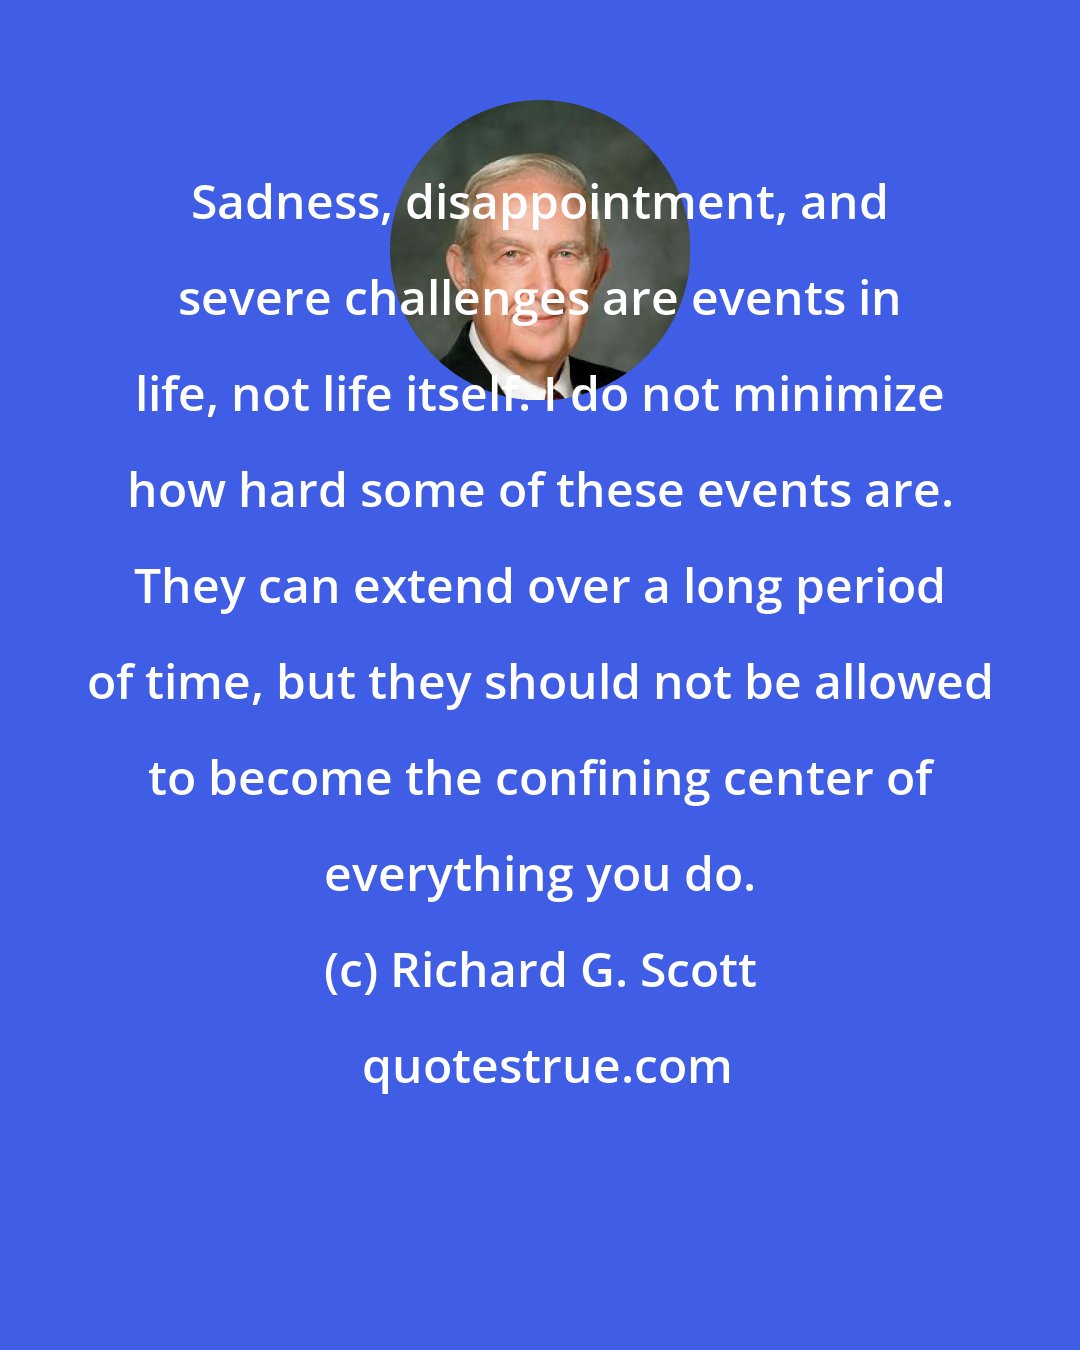 Richard G. Scott: Sadness, disappointment, and severe challenges are events in life, not life itself. I do not minimize how hard some of these events are. They can extend over a long period of time, but they should not be allowed to become the confining center of everything you do.